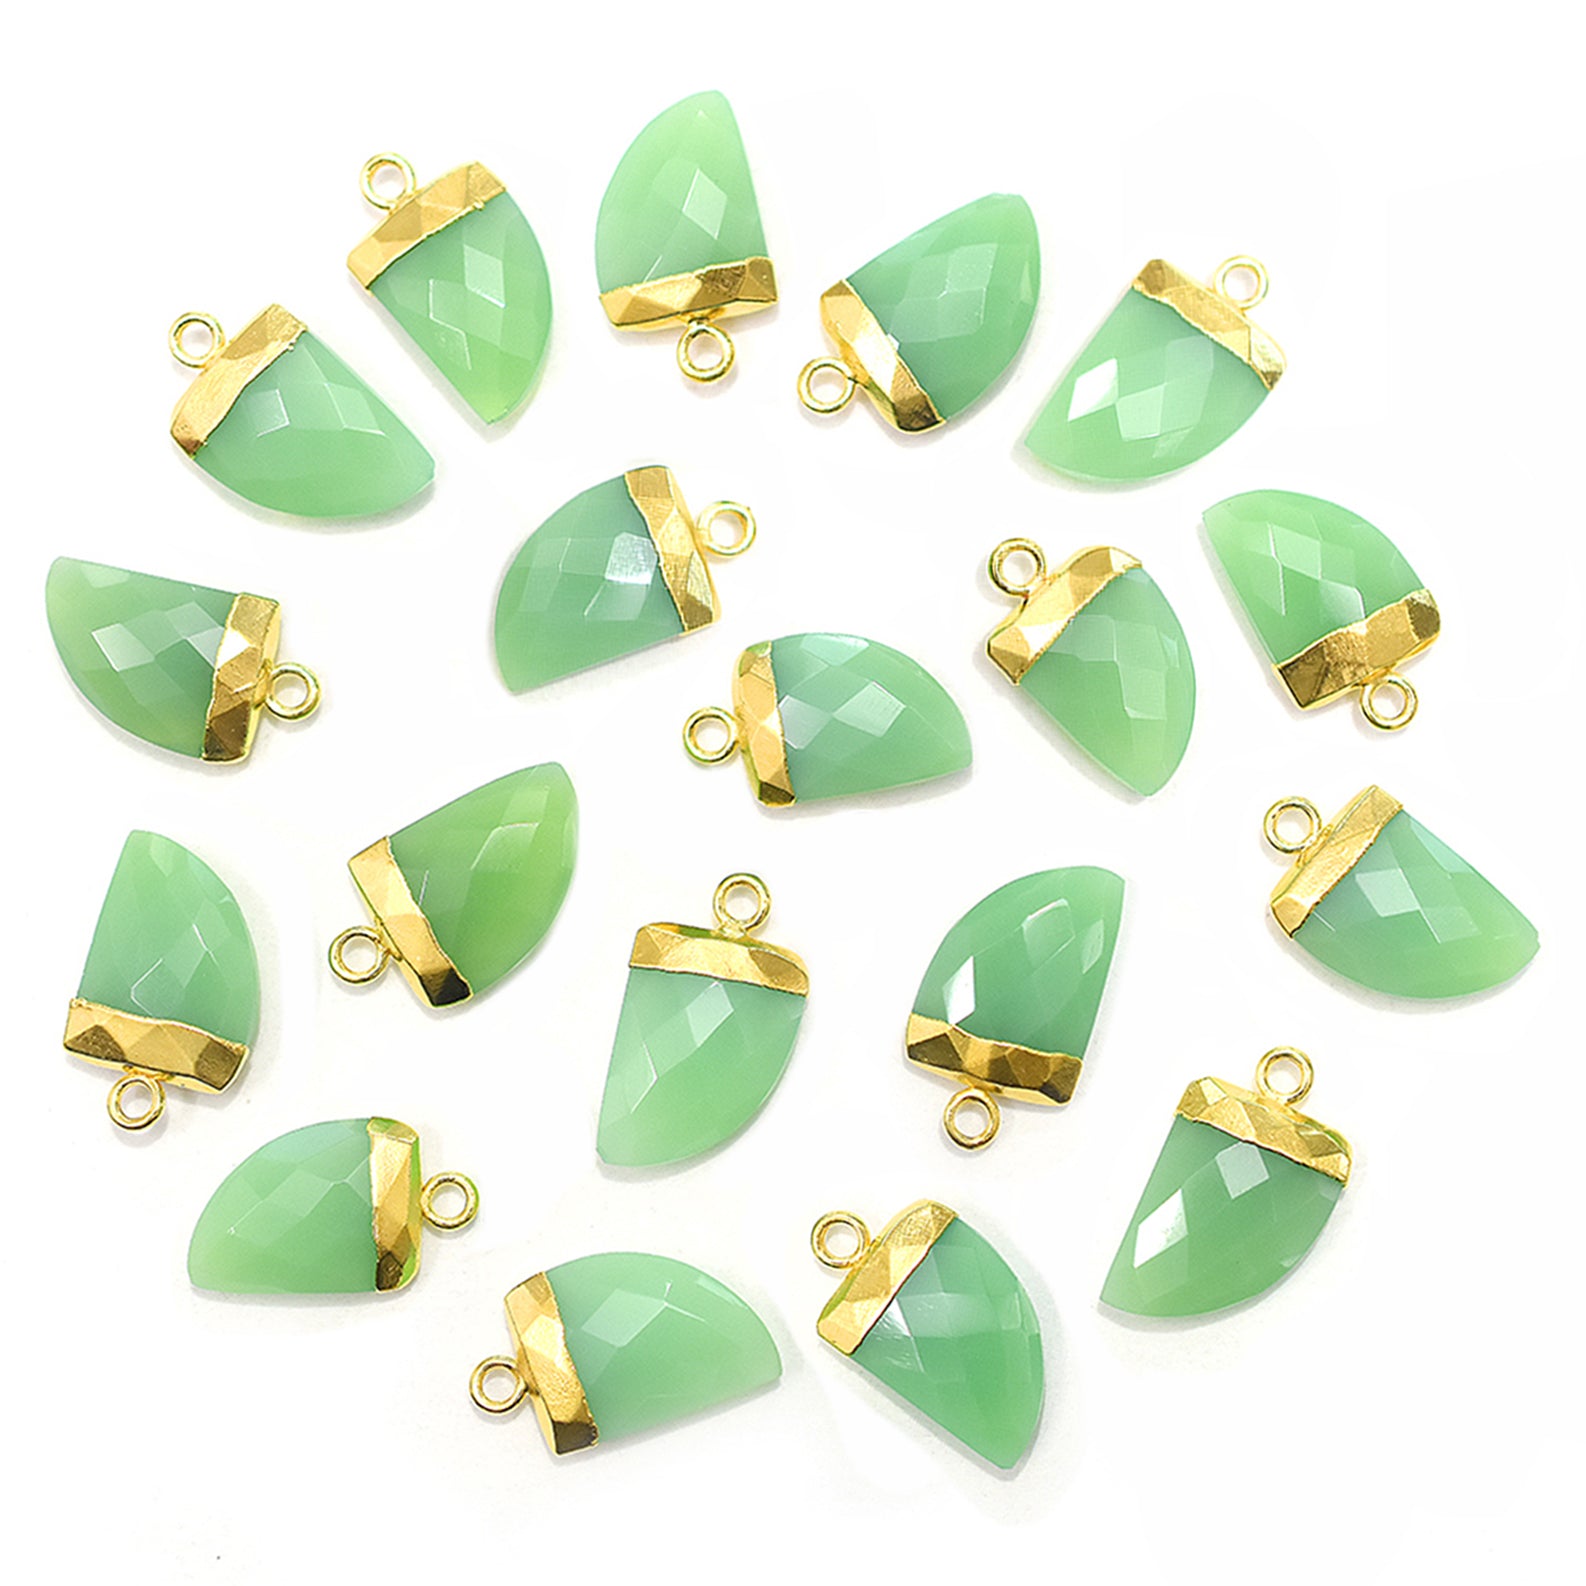 Chrysoprase Chalcedony 14X10 MM Horn Shape Gold Electroplated Pendant